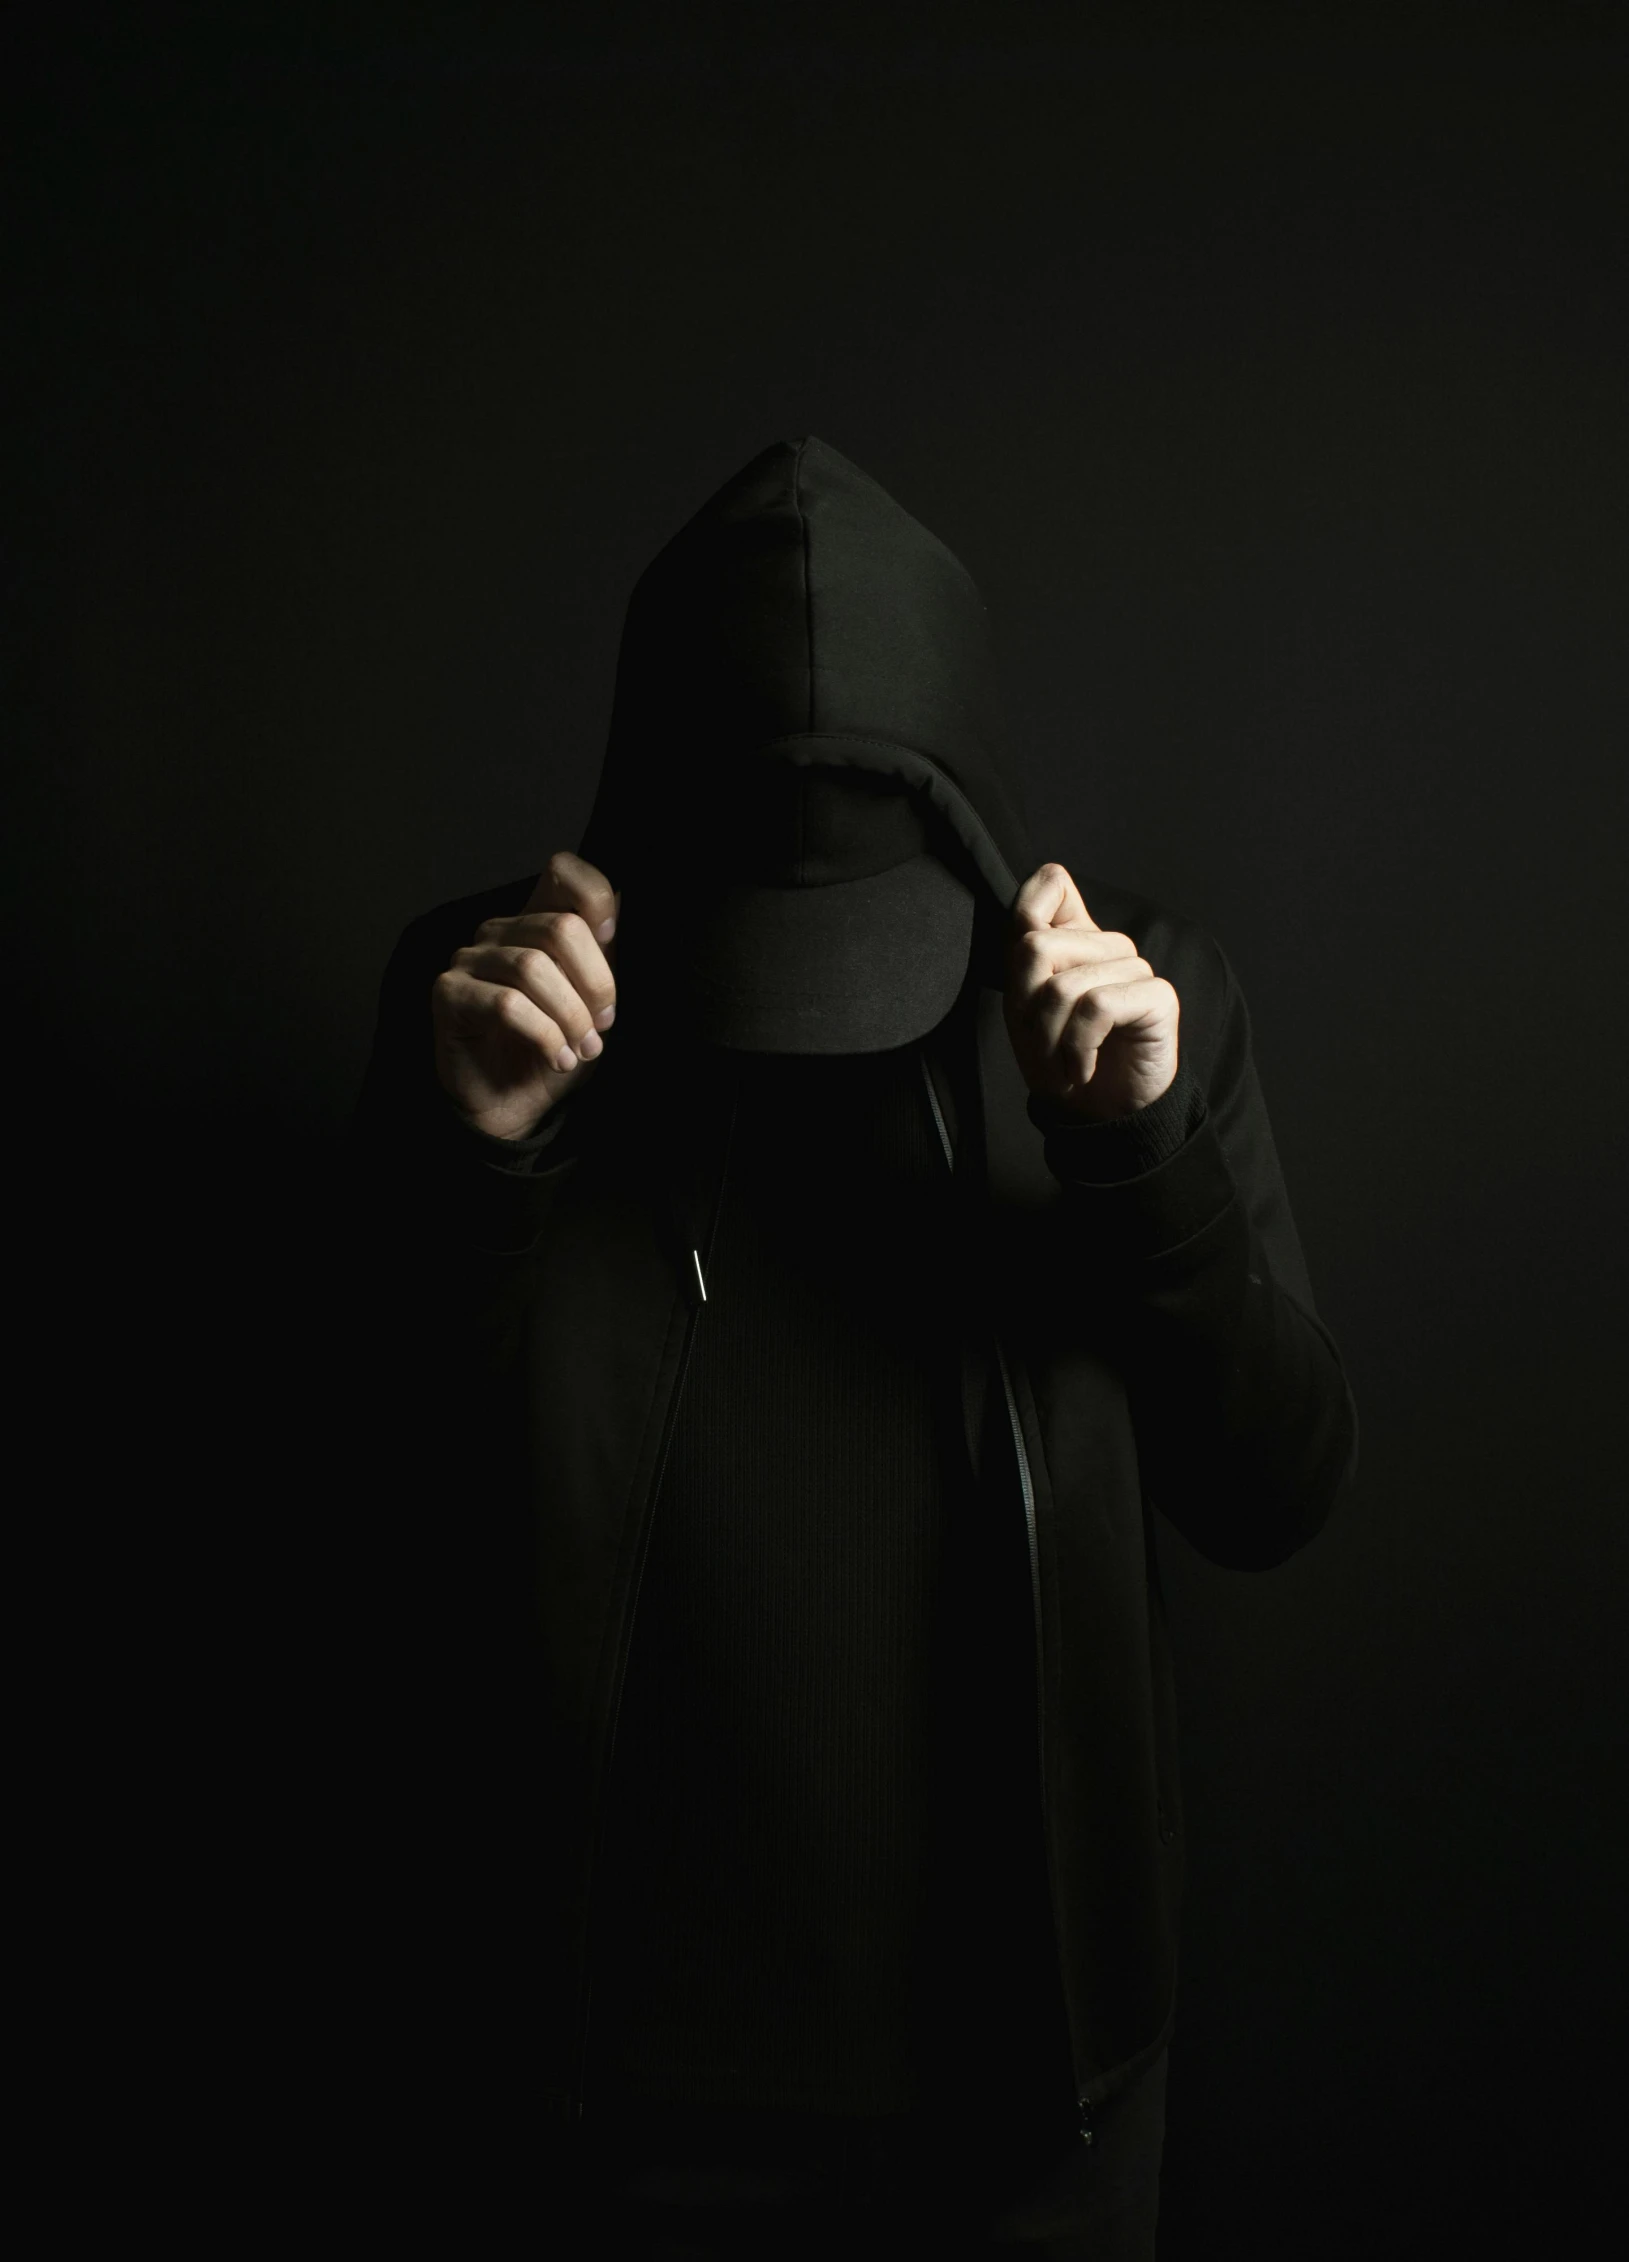 a person wearing a hooded jacket and holding a hat